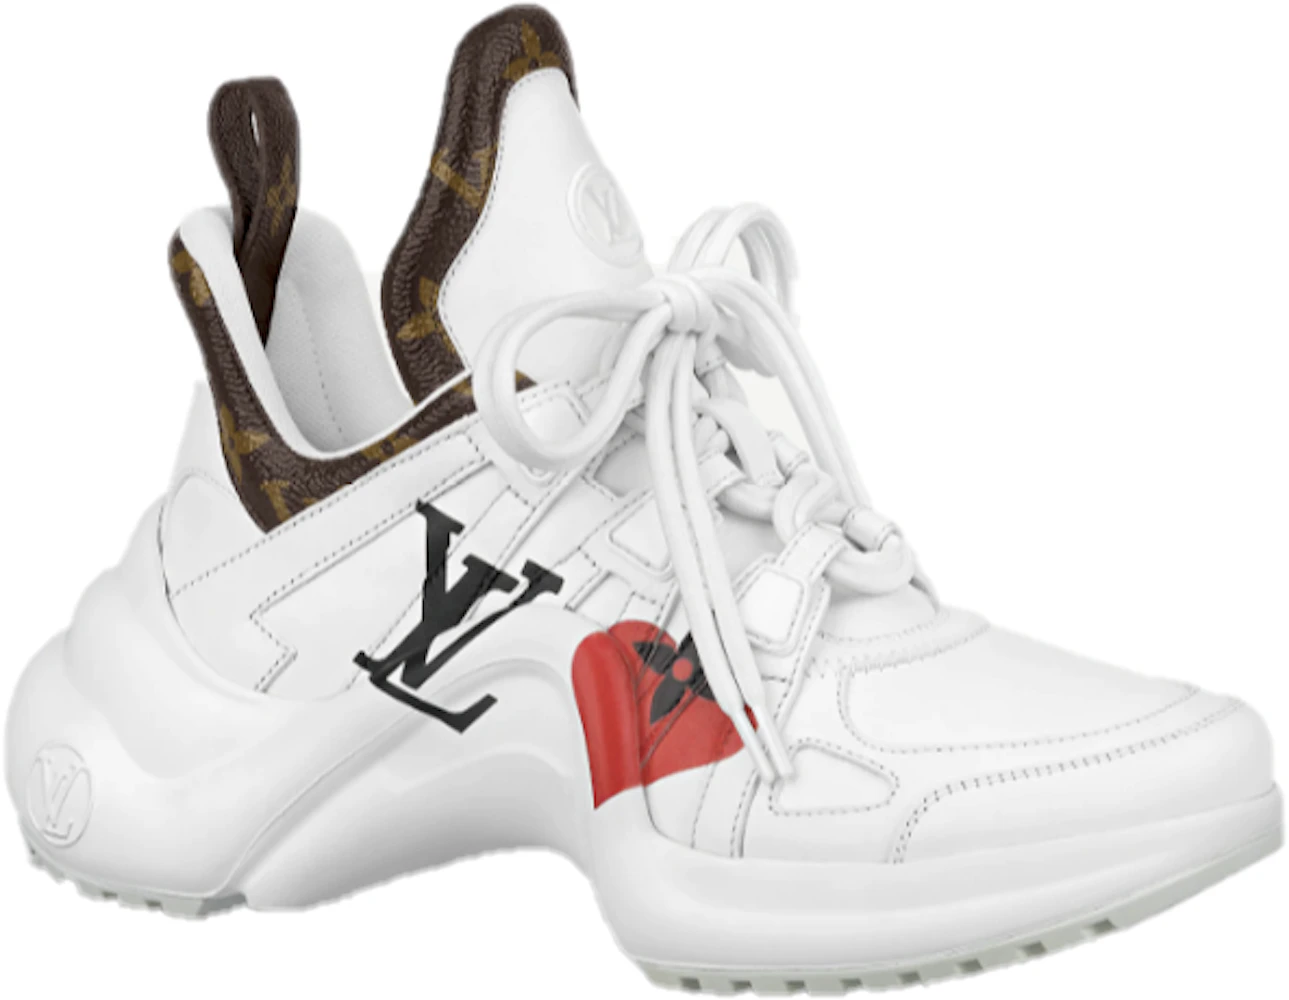 Louis Vuitton Archlight Game On (Women's) - 1A8MRP - US